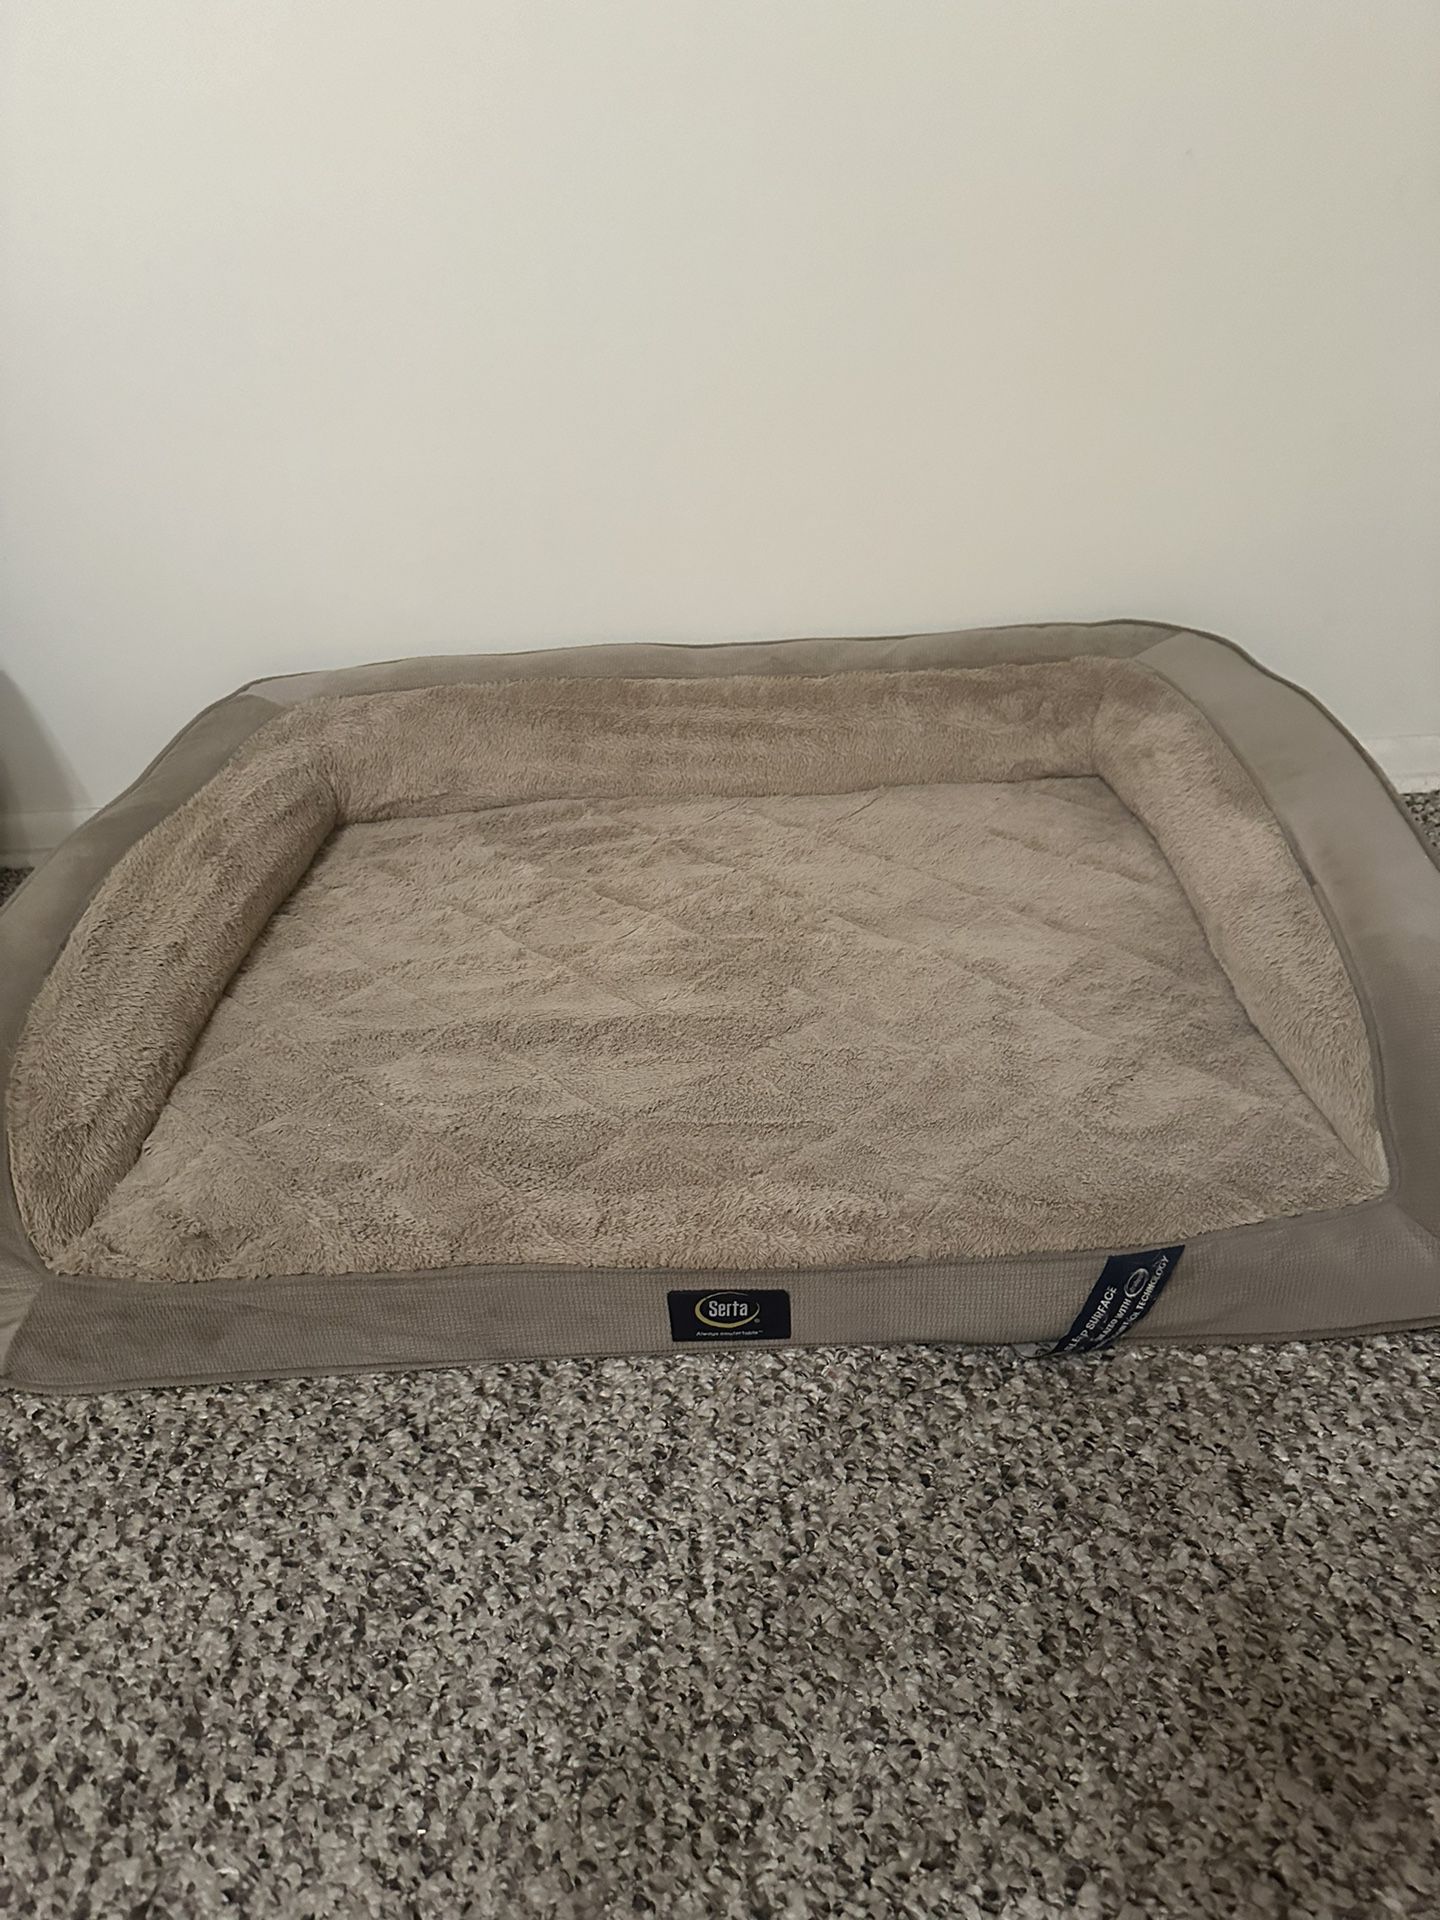 Serta Dogbed For Large Dogs